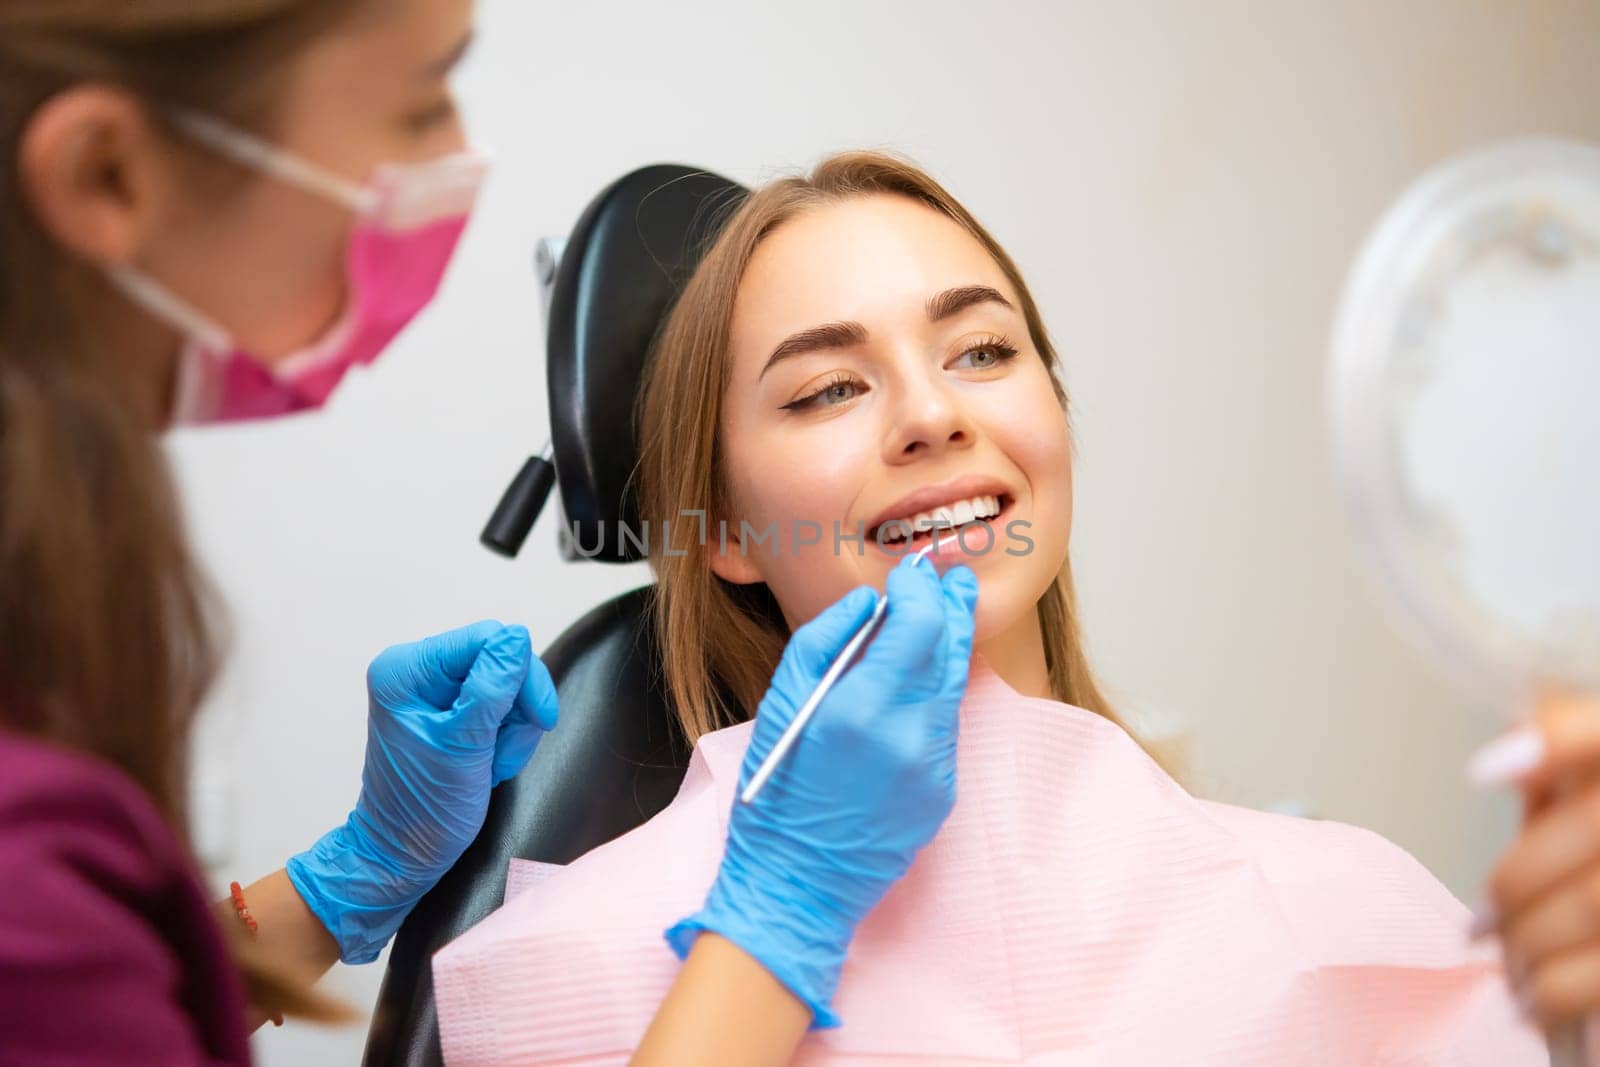 Woman patient sitting in armchair during dental treatment in dental clinic. Doctor checking front teeth with instrument to check soundness of teeth